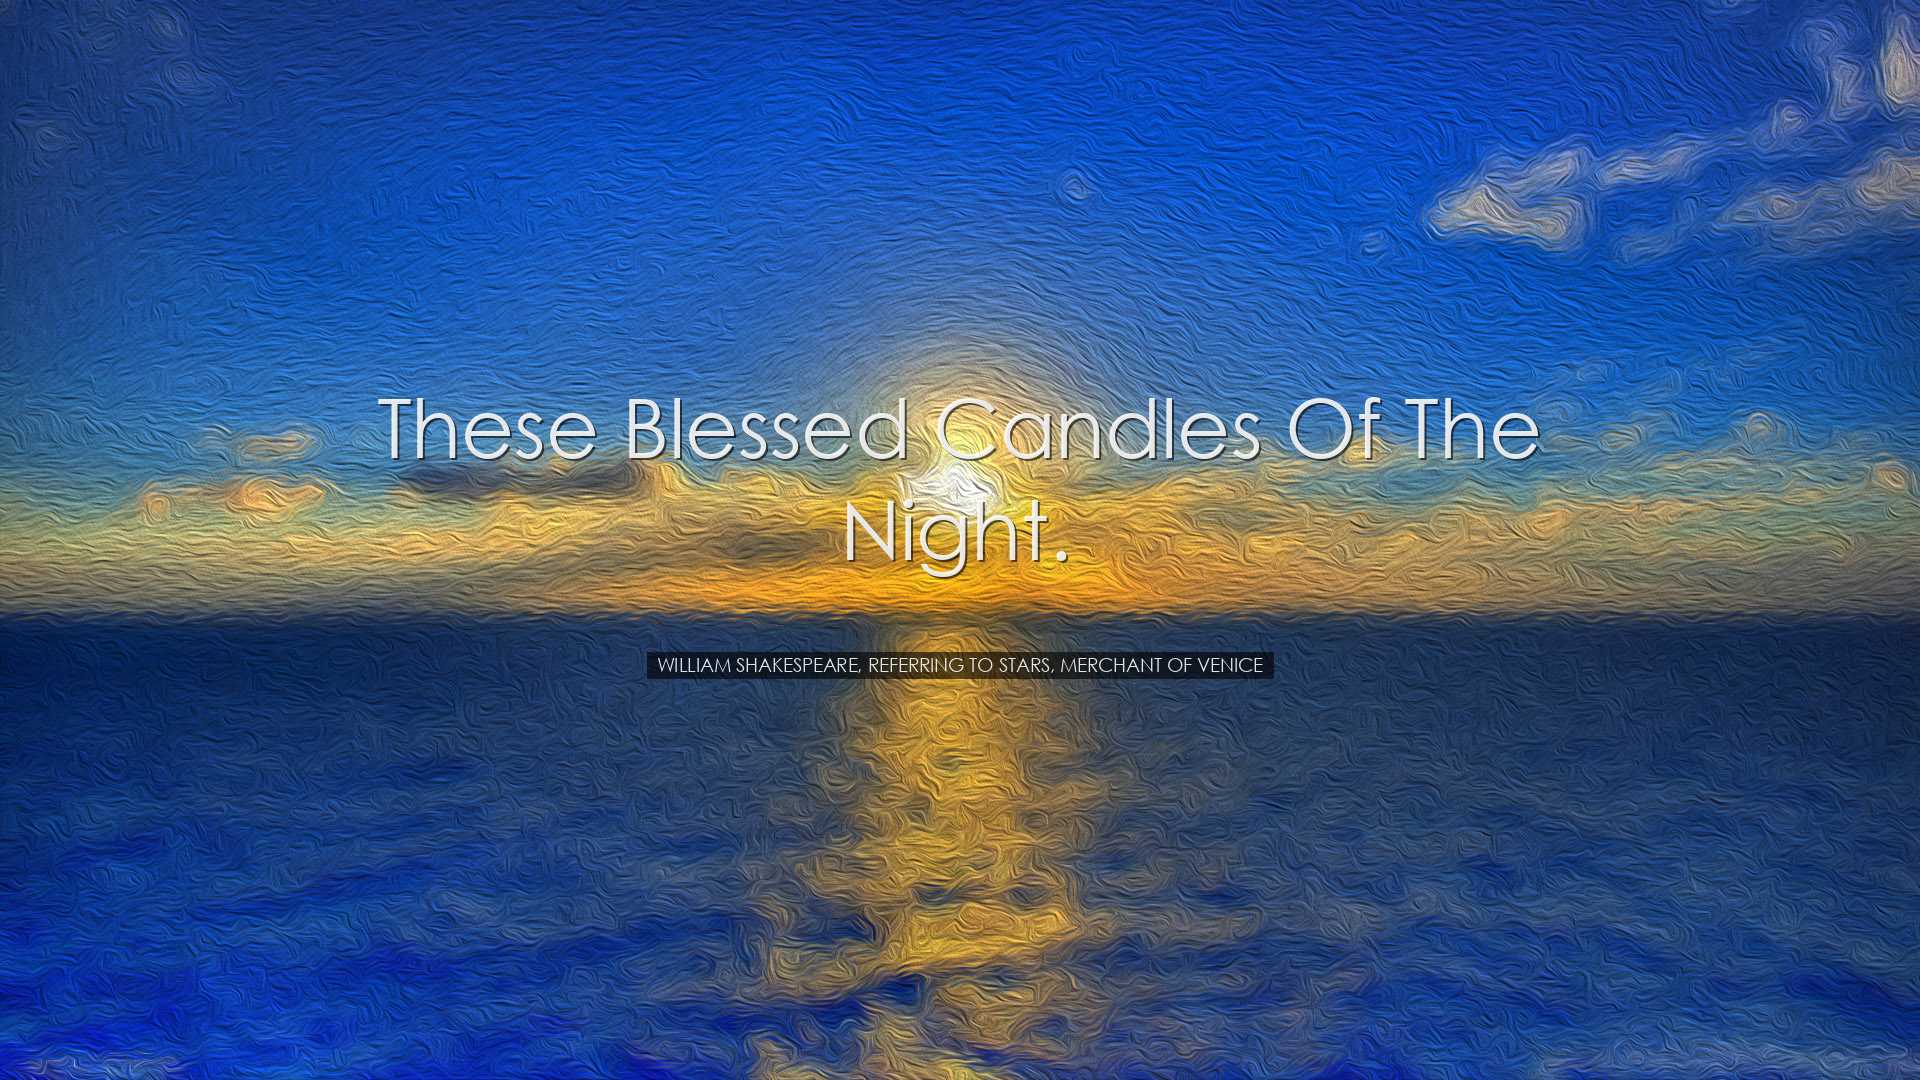 These blessed candles of the night. - William Shakespeare, referri